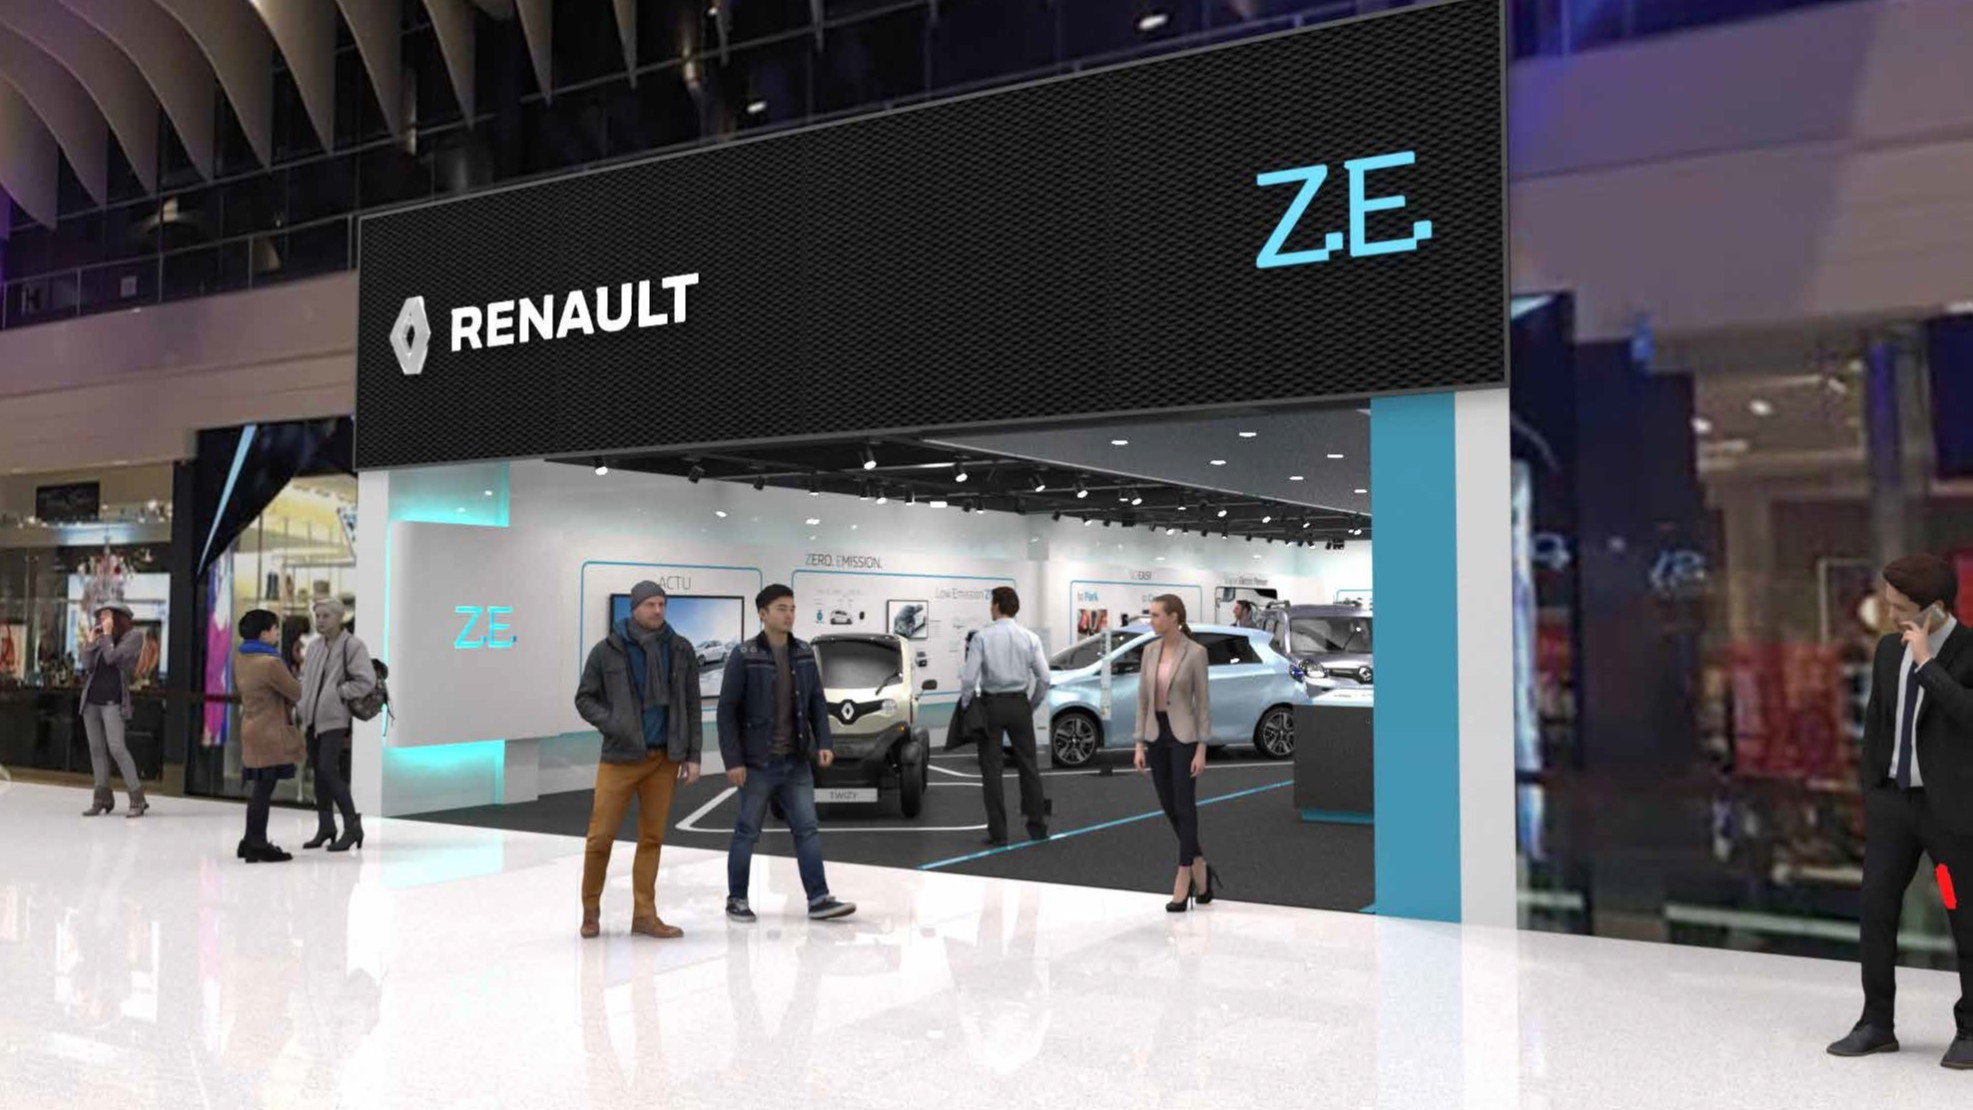 Rendering of Renault Electric Vehicle Experience Center, opened in Taby Centrum, Stockholm, Feb 2018